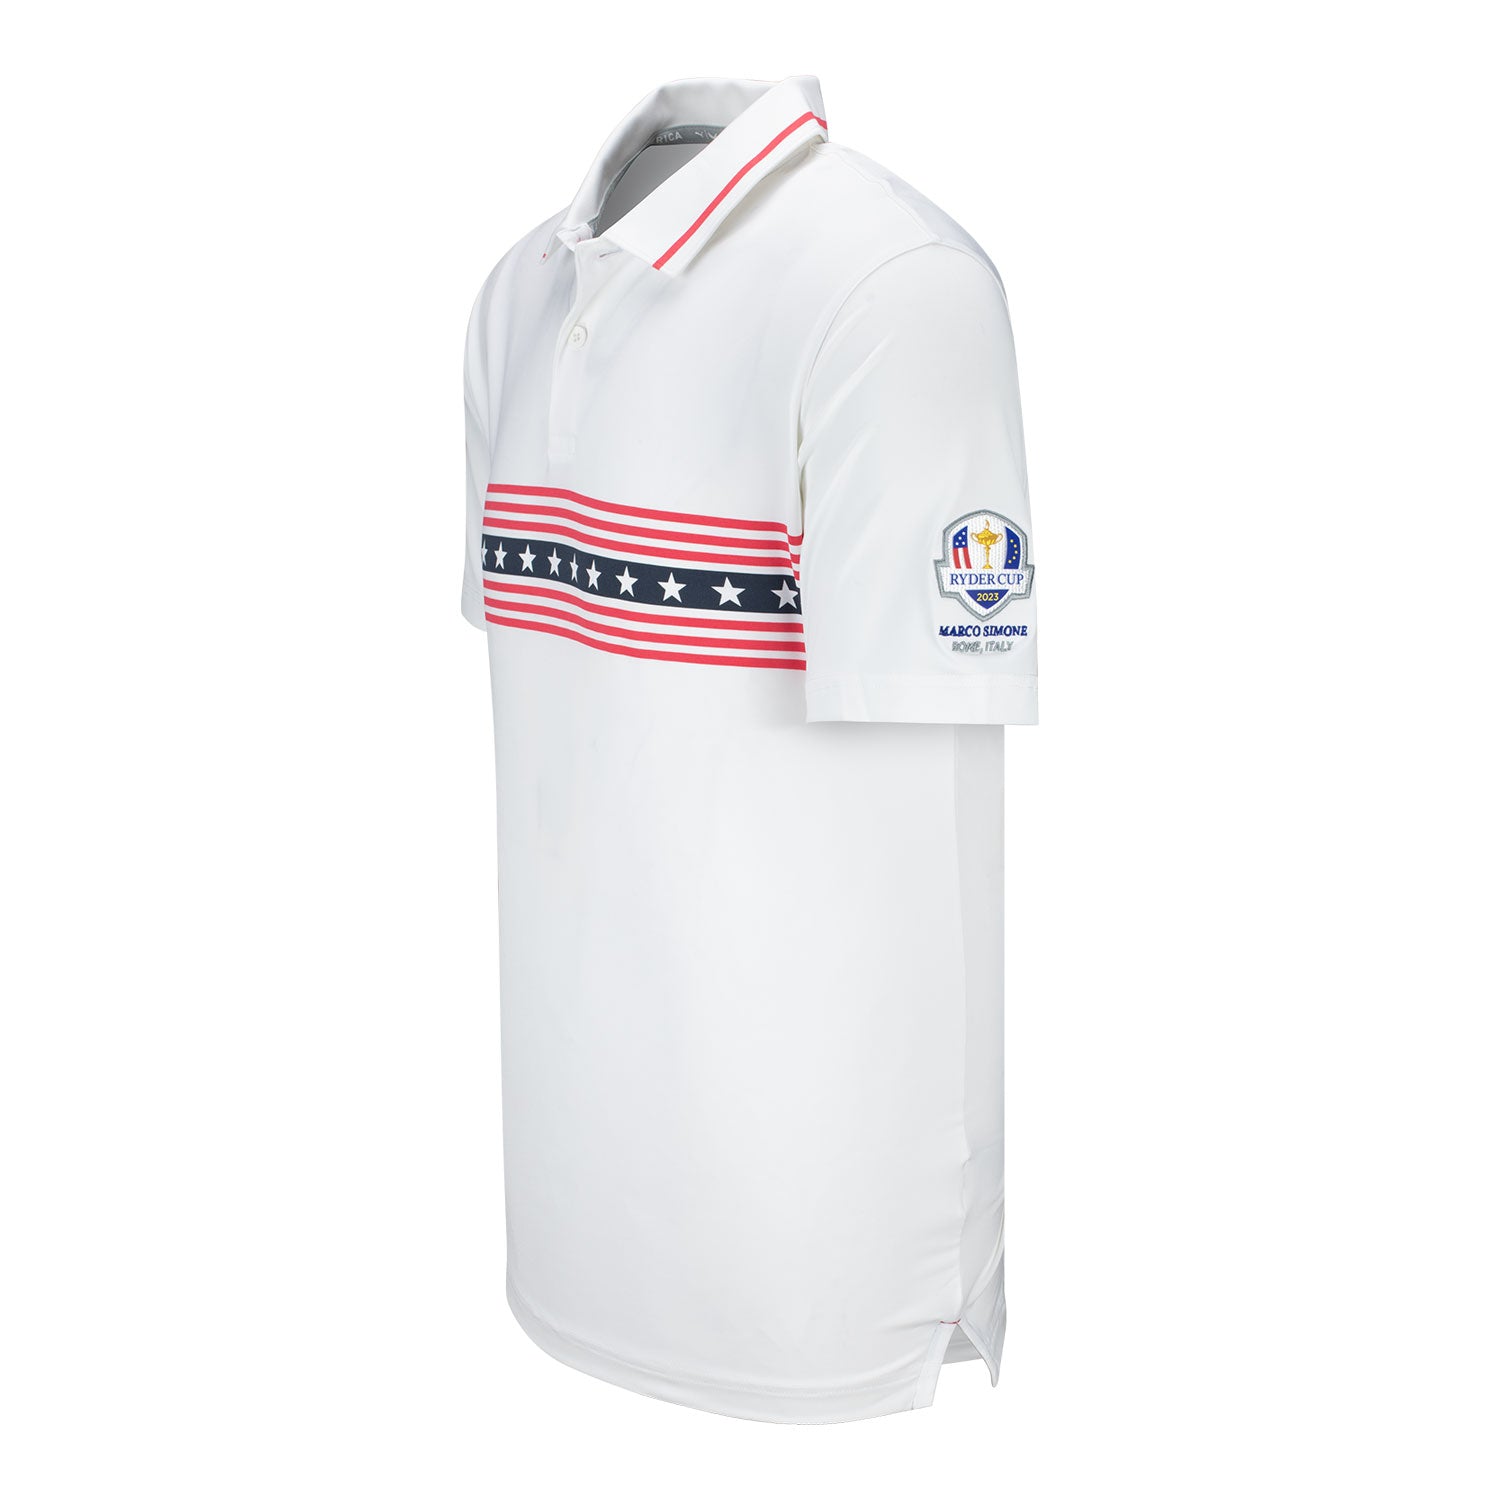 Puma Golf 2023 Ryder Cup Men's Volition Freedom Stripe Golf Polo - Front View